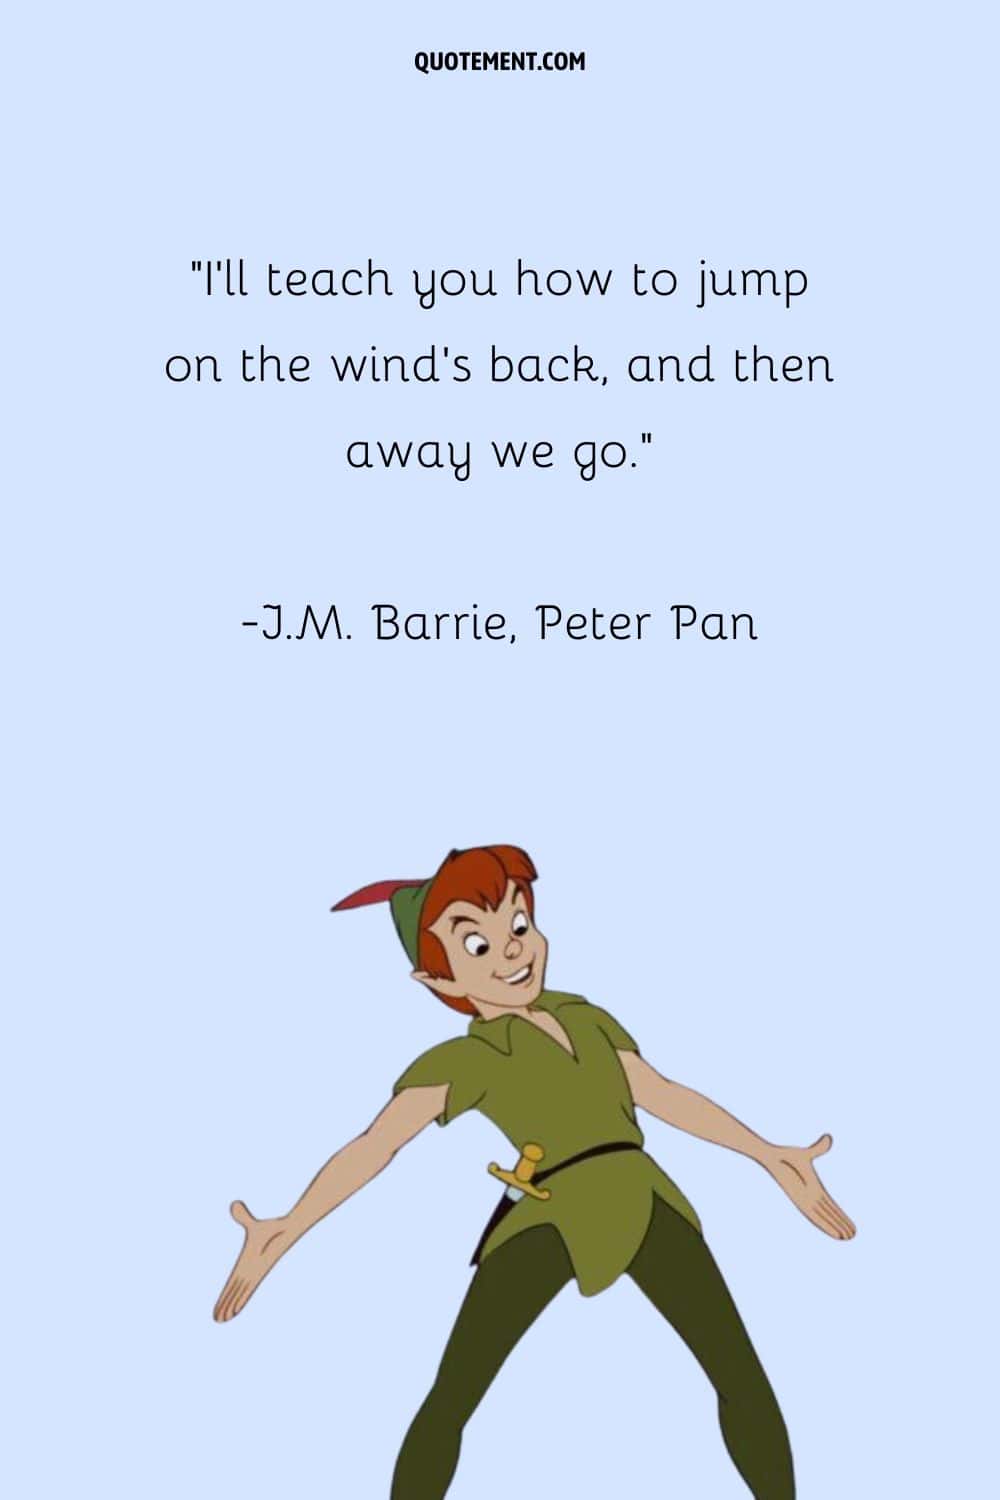 “I'll teach you how to jump on the wind's back, and then away we go.” ― J.M. Barrie, Peter Pan